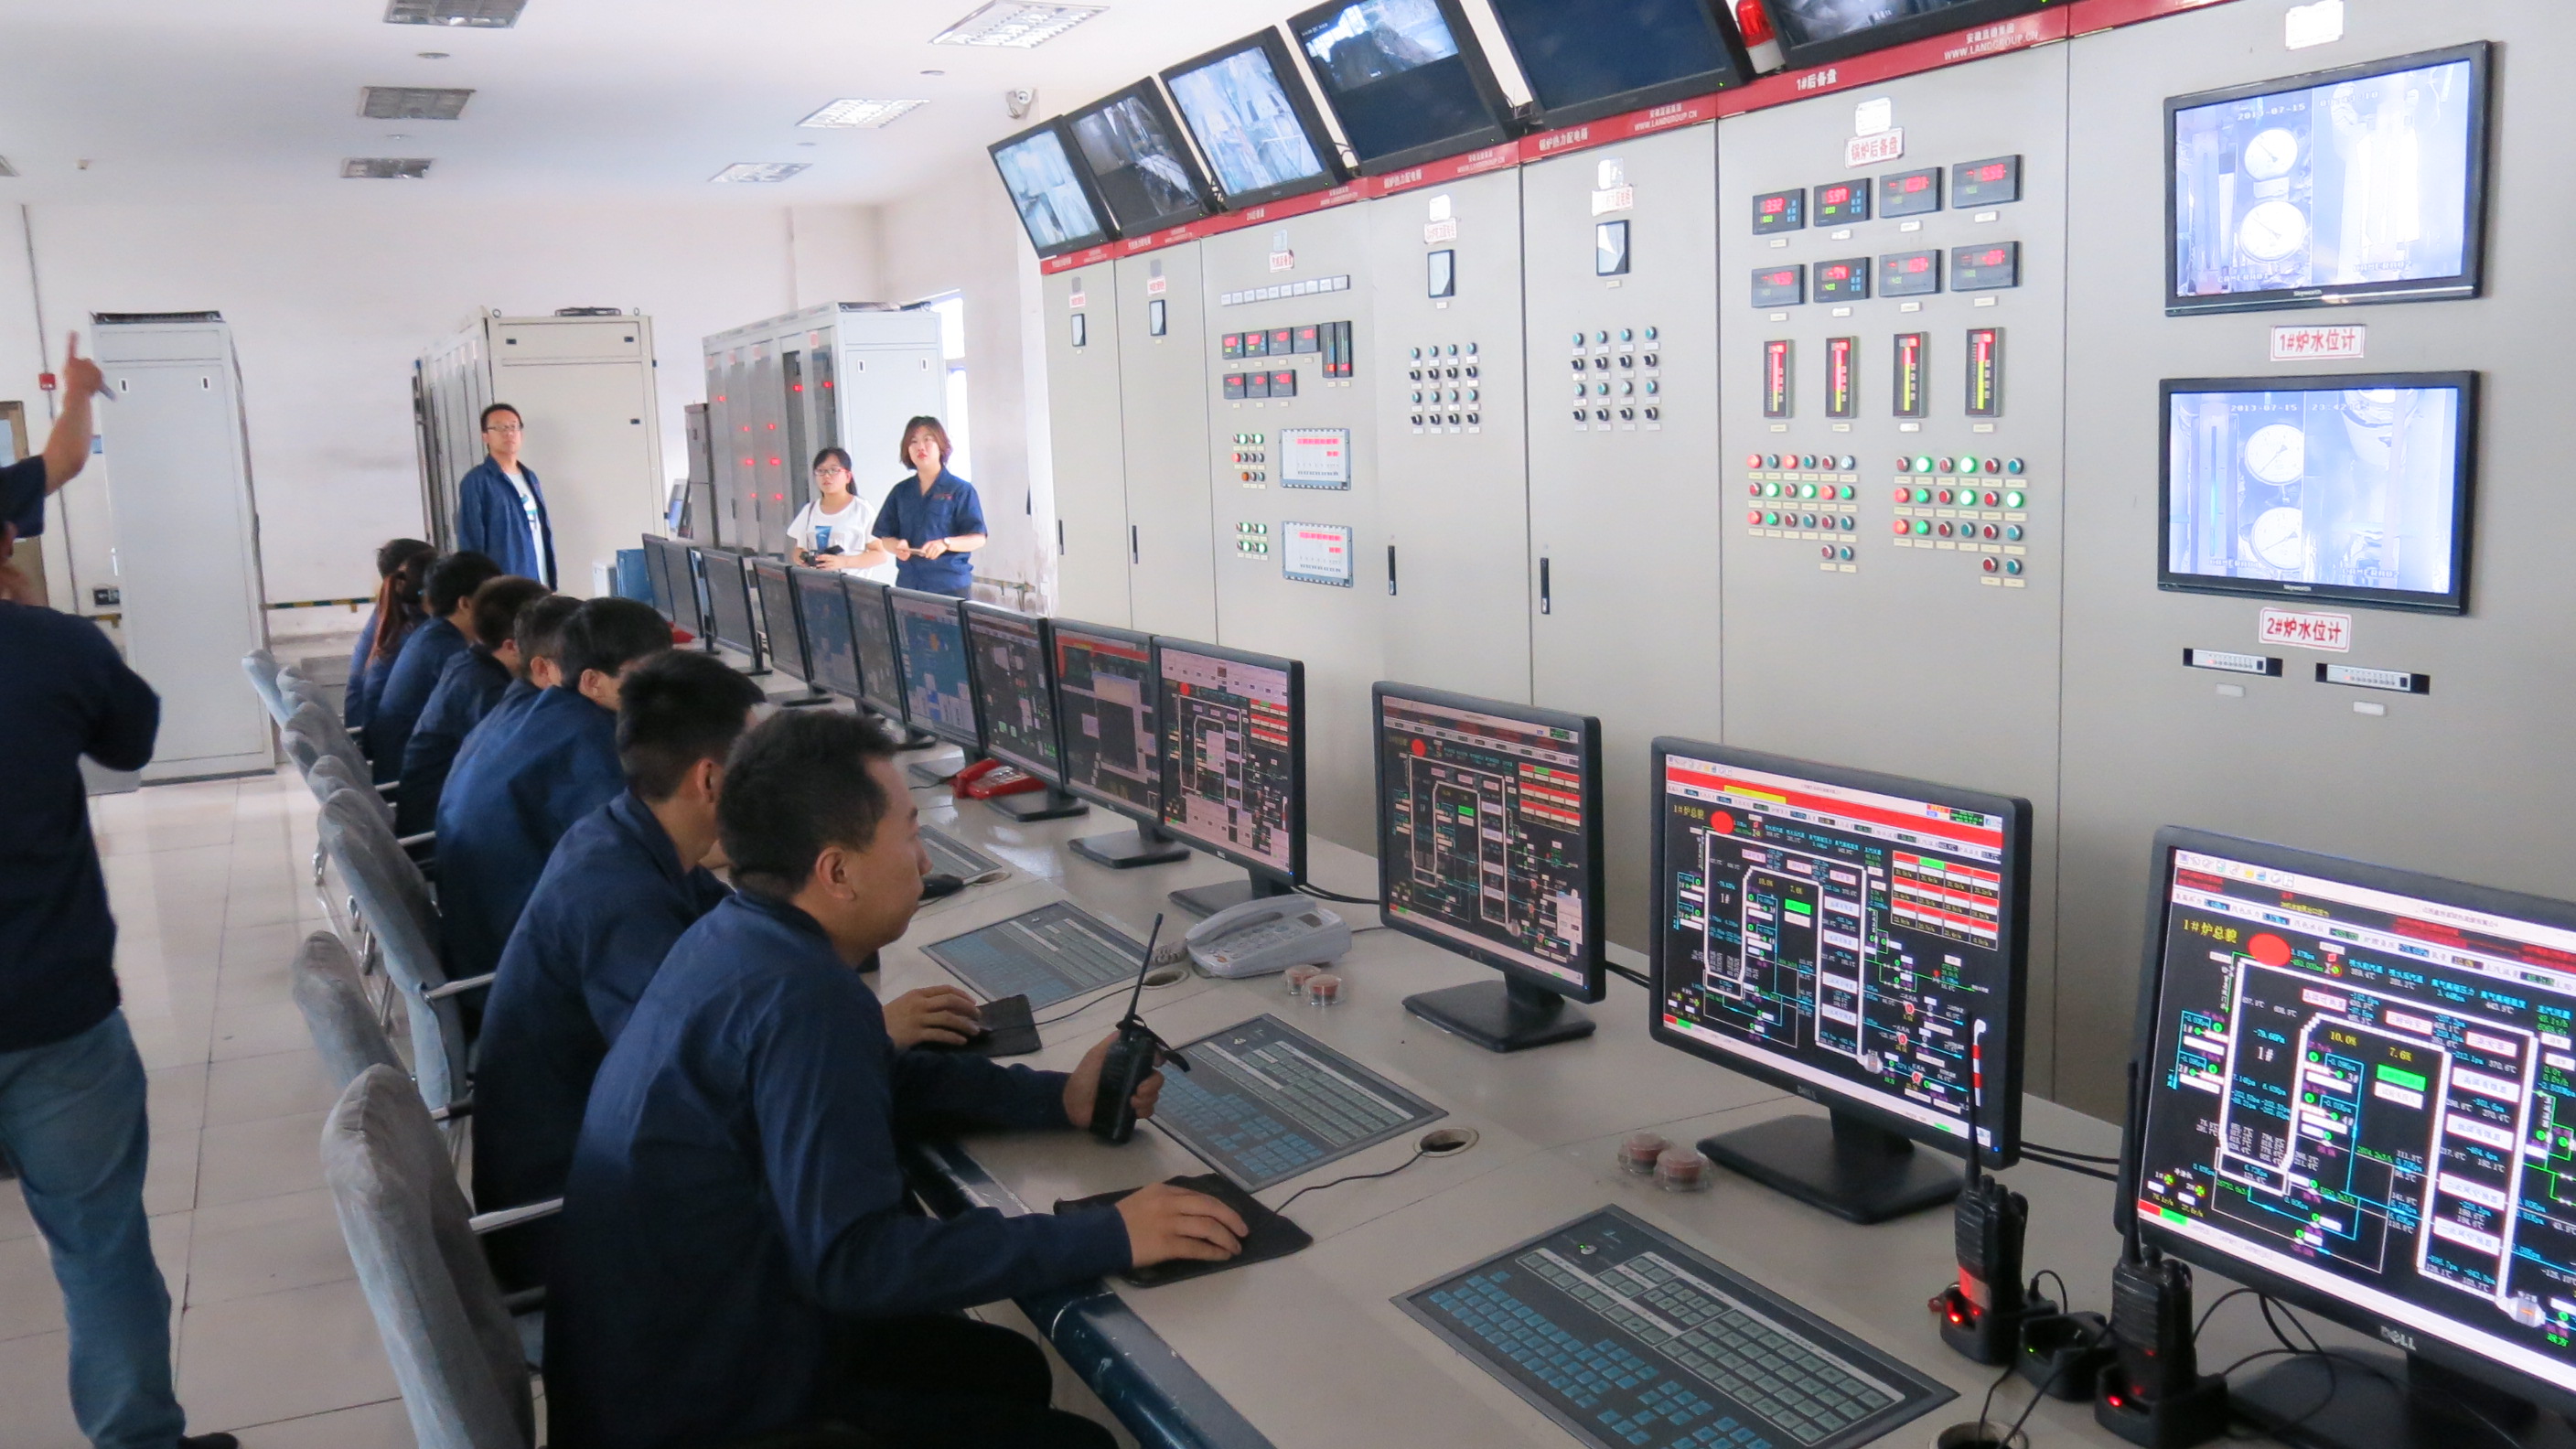 Employees in the control room monitor data from the Shanxi Xinshitai Green Energy power plant. [Photo by Chris Georgiou / China.org.cn]